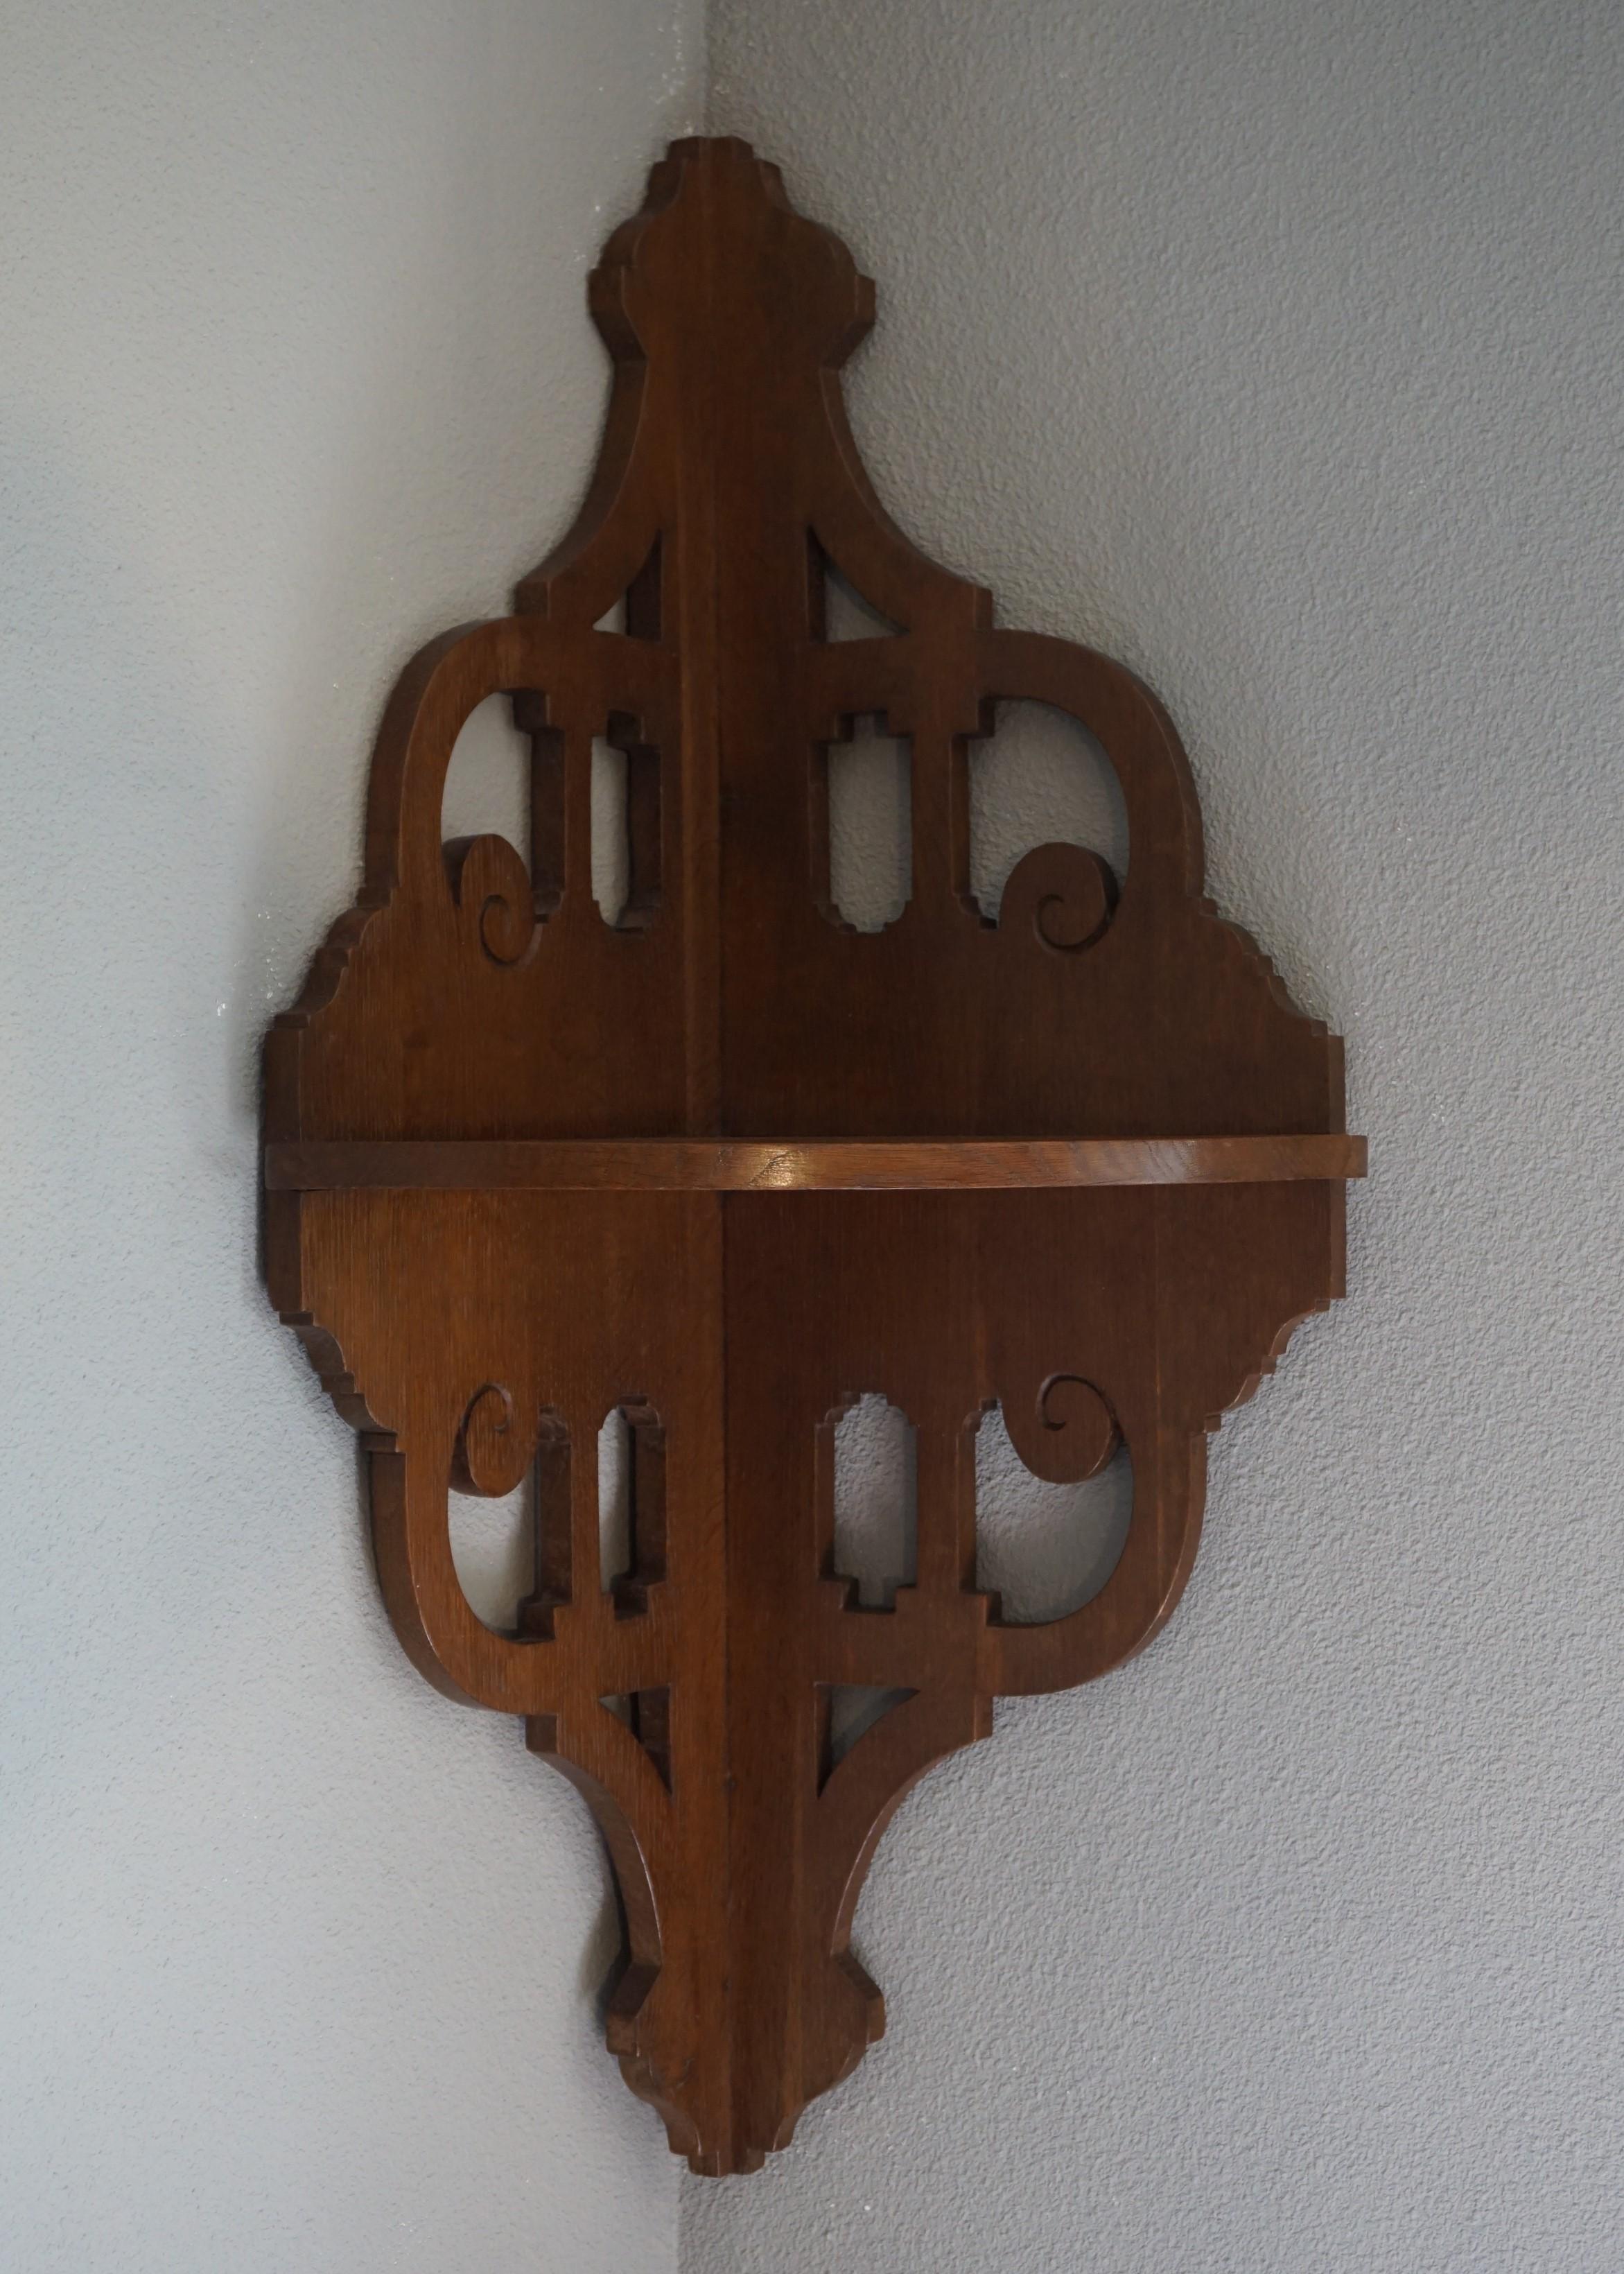 Good size and rare Arts & Crafts corner shelf for displaying purposes.

Corner wall brackets from this era are a rare find in all countries and to have found an original, Dutch Arts & Crafts specimen in this wonderful condition more than made our